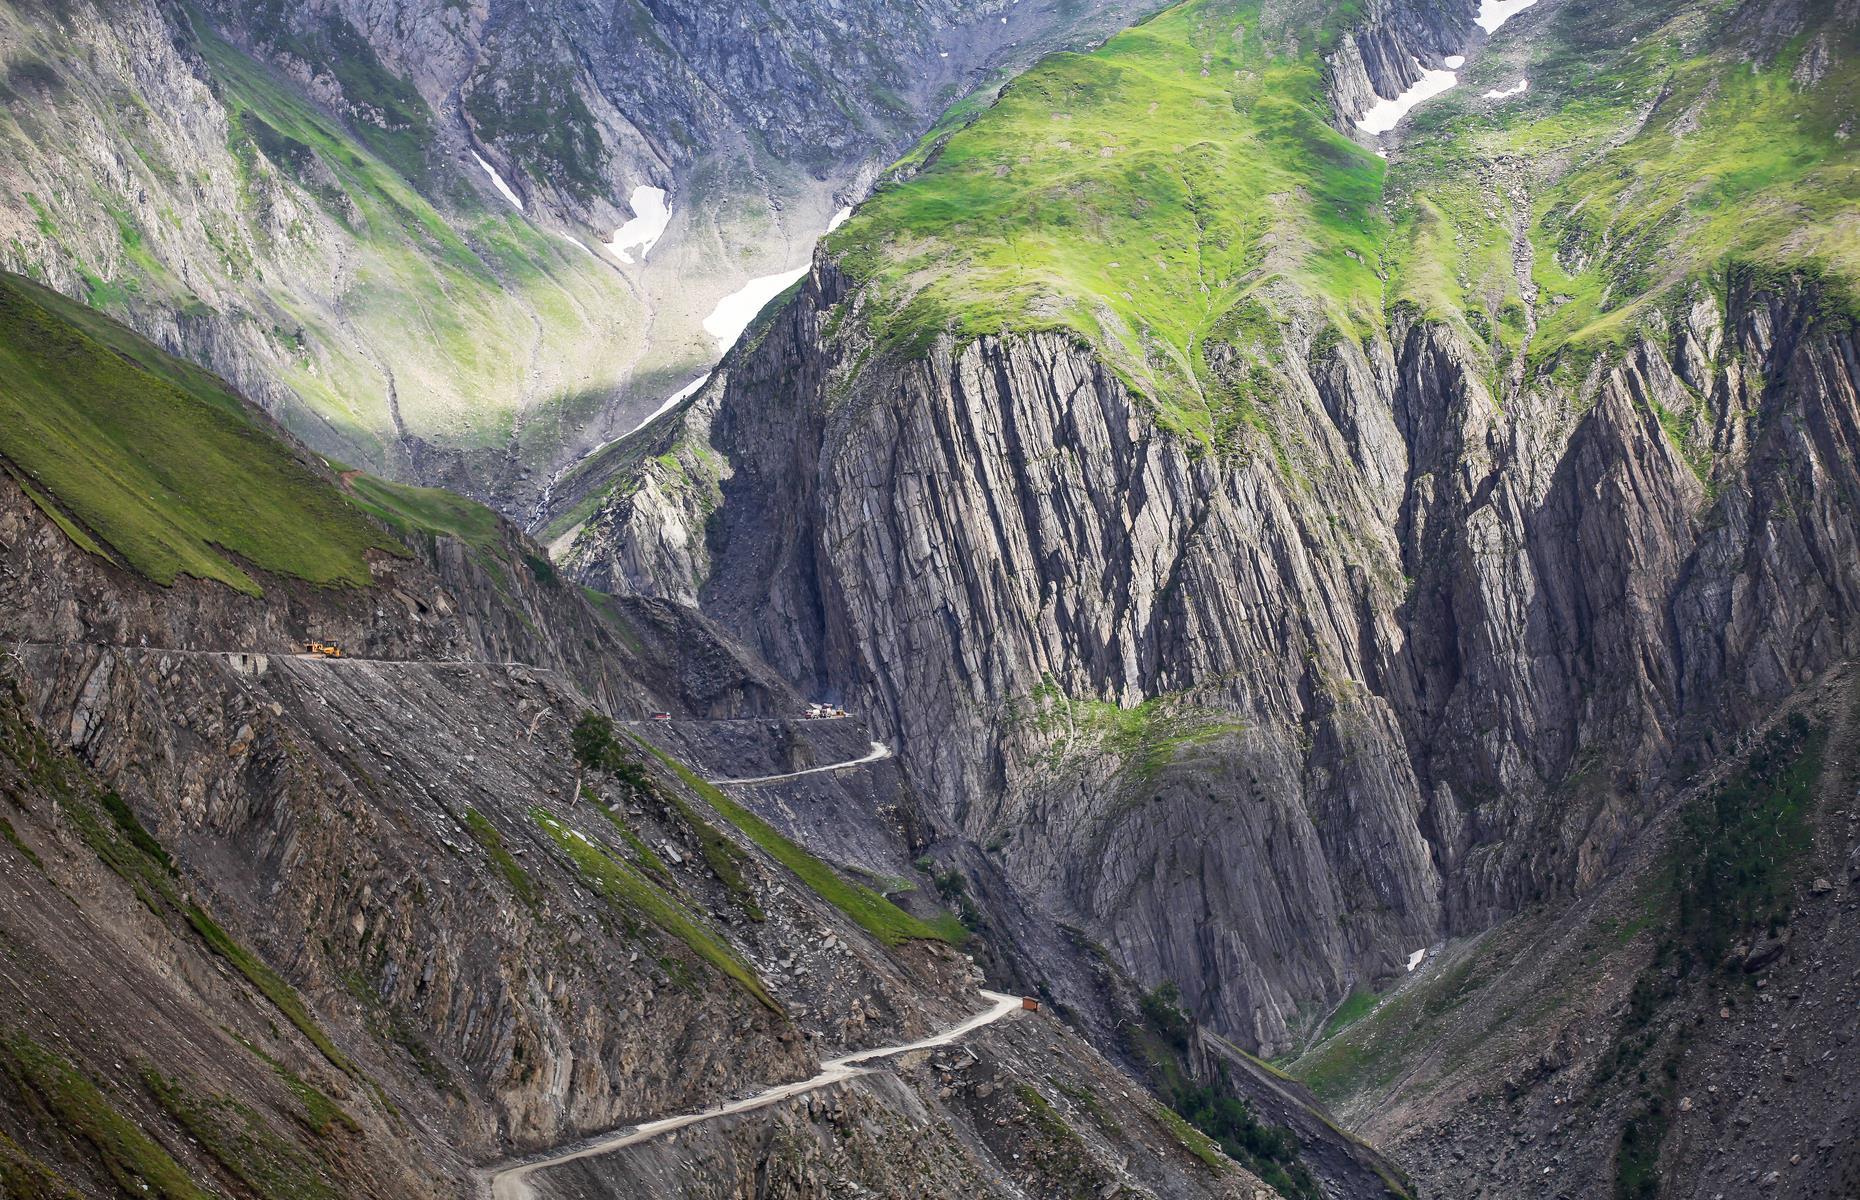 <p>Drivers must contend with extreme weather conditions and an extremely narrow and steep route on this hazardous road between Ladakh and Kashmir in India. As well as strong winds and landslides, there are no barriers to prevent vehicles from plunging down the steep gorge. The pass, which climbs to 11,500 feet (3,000m) above sea level on the edge of the Himalayas, is part of National Highway 1, which goes between Srinagar and Leh. </p>